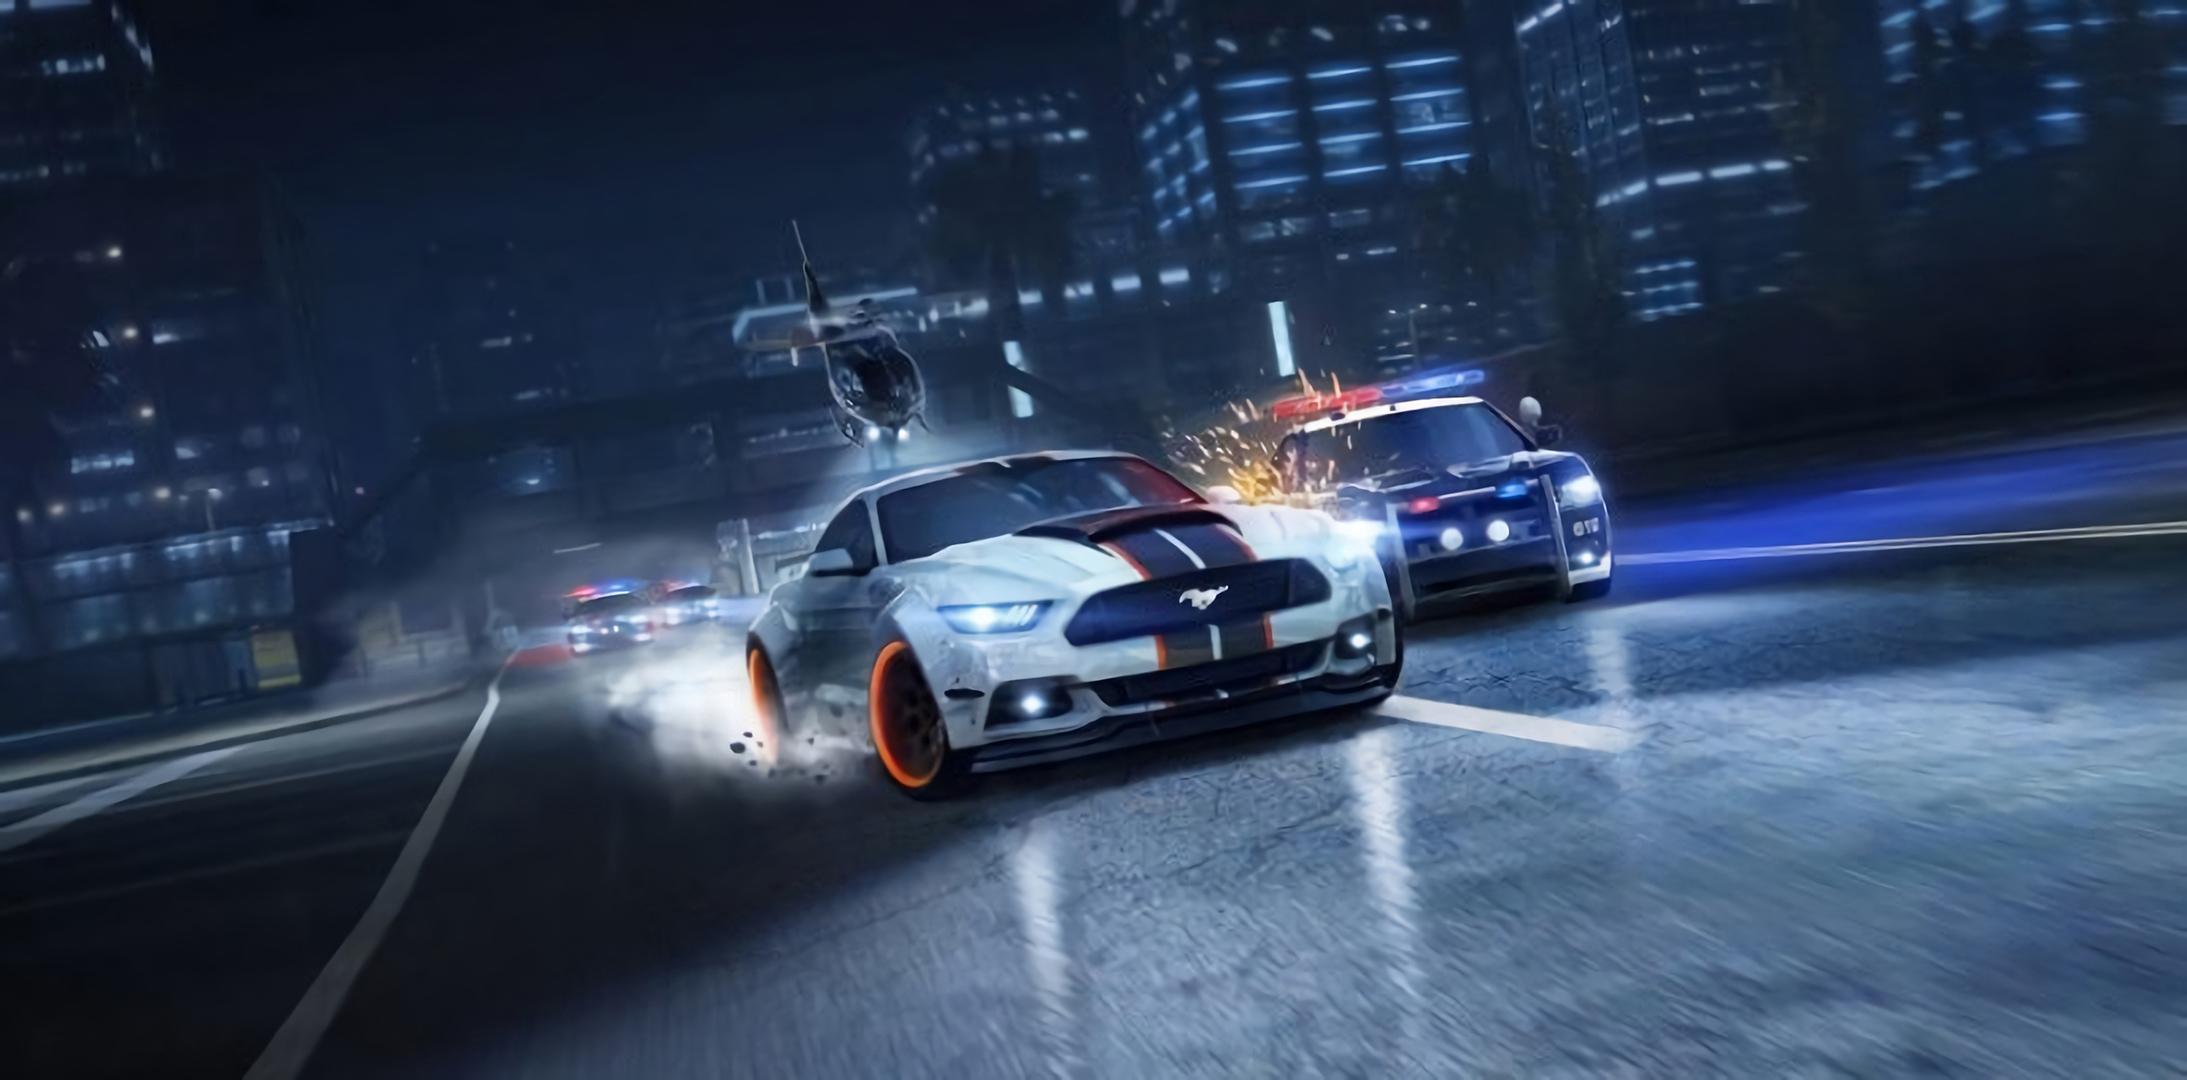 Need For Speed Heat 2019 Game, HD Anime, 4k Wallpaper, Image